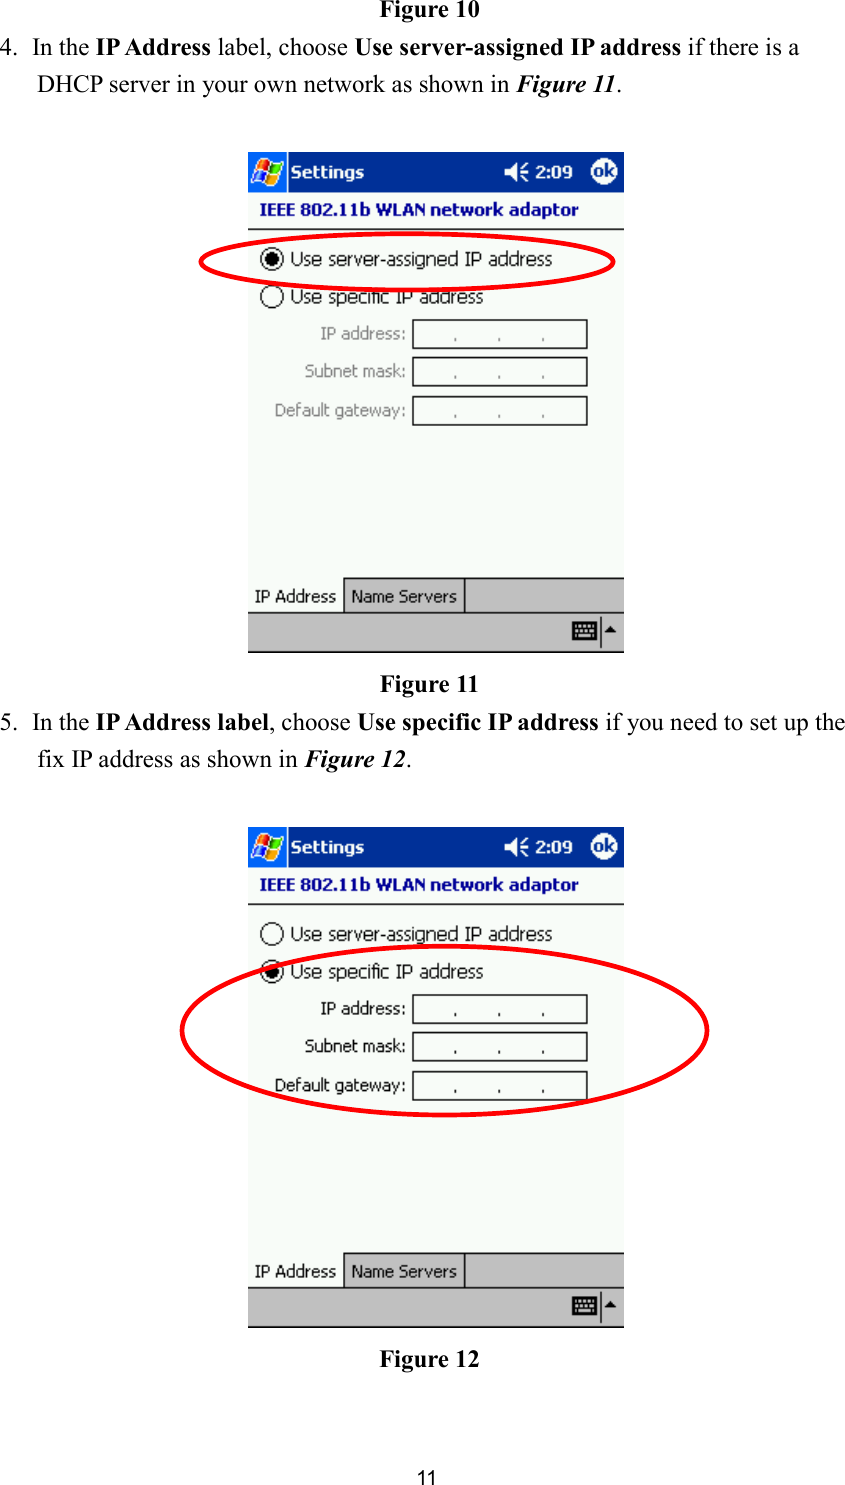  11Figure 10 4. In the IP Address label, choose Use server-assigned IP address if there is a DHCP server in your own network as shown in Figure 11.     Figure 11 5. In the IP Address label, choose Use specific IP address if you need to set up the fix IP address as shown in Figure 12.     Figure 12  